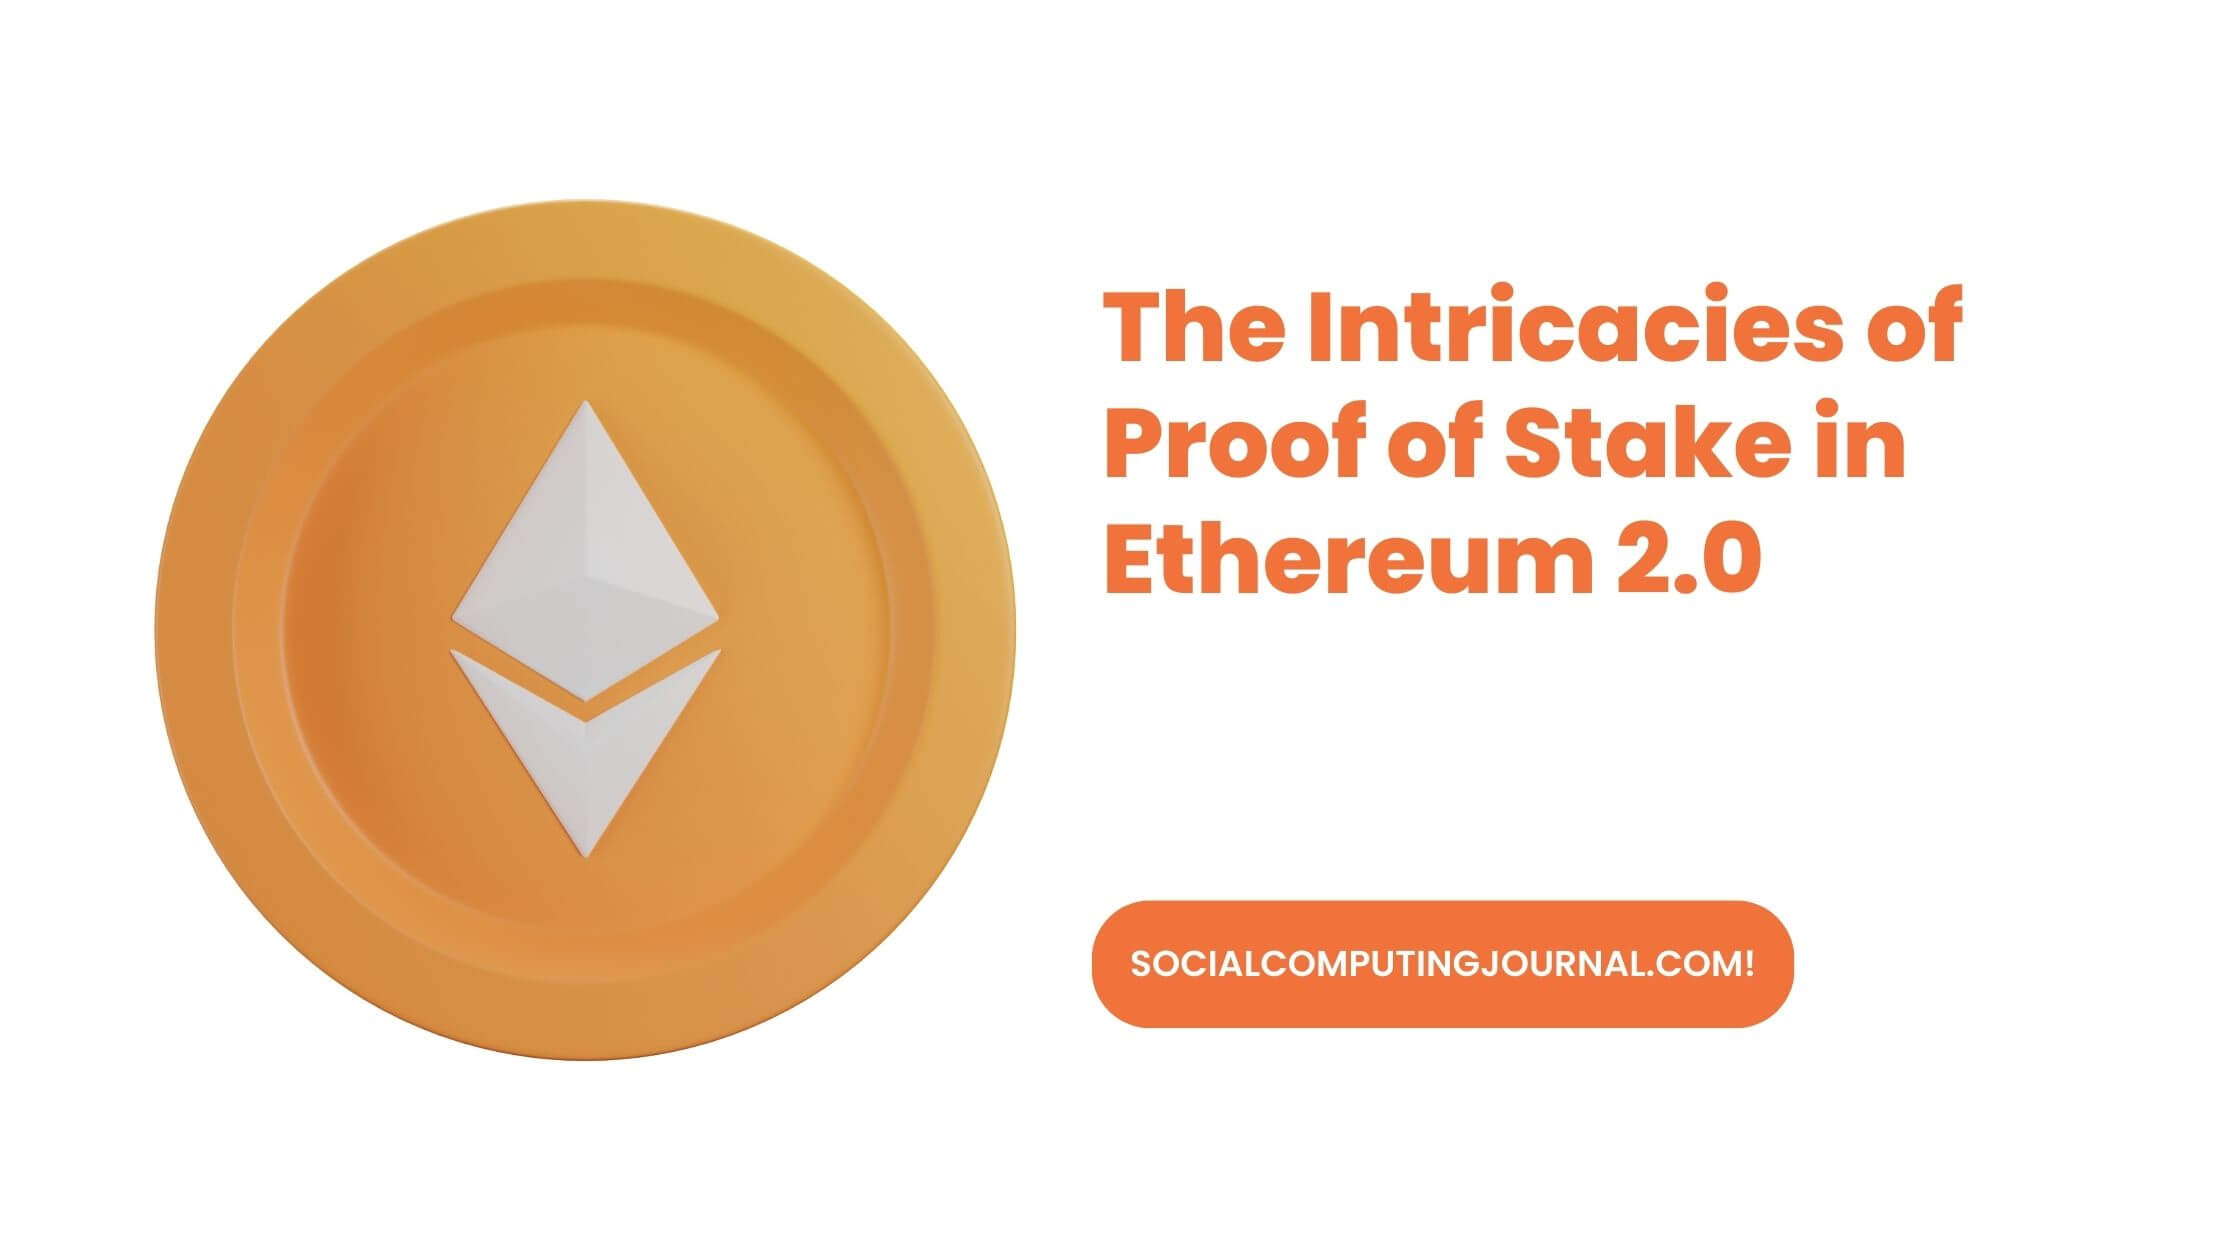 The Intricacies of Proof of Stake in Ethereum 2.0